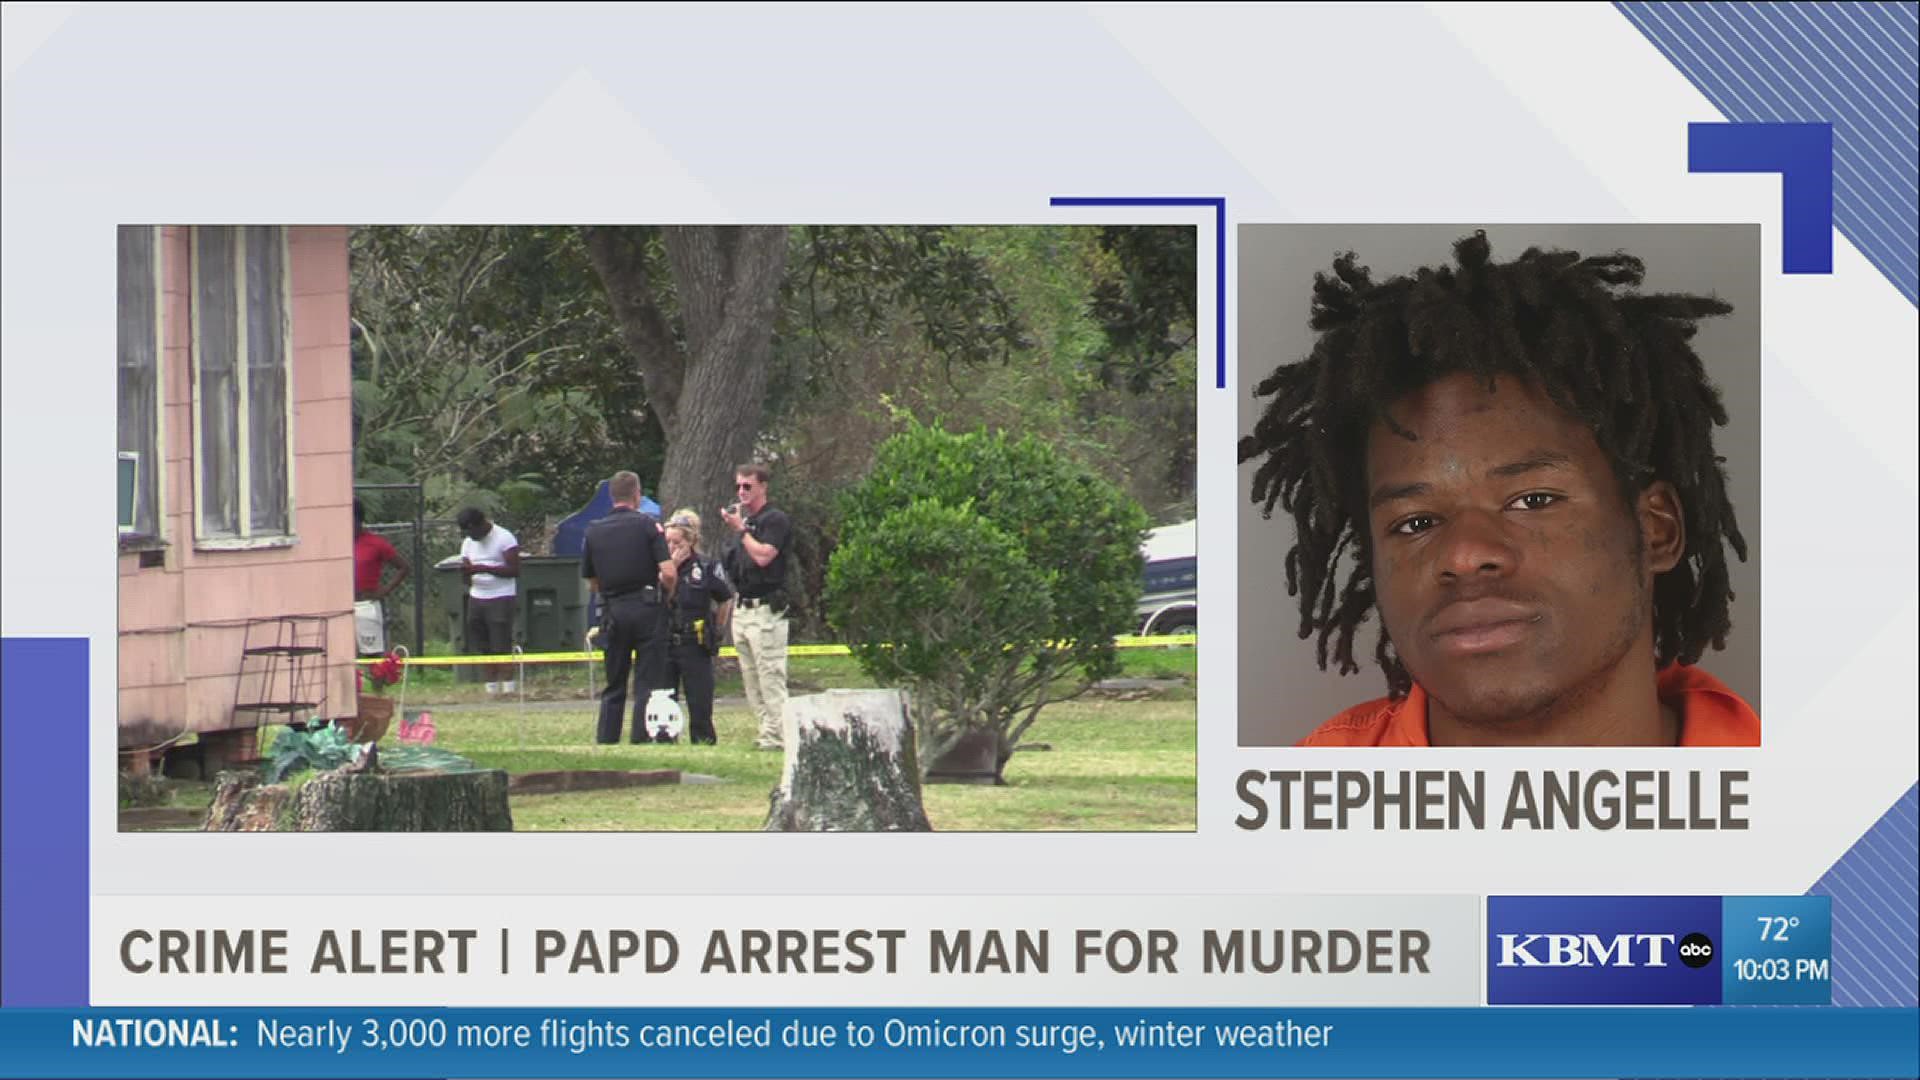 Port Arthur Police determined that the second victim was a suspect in the fatal shooting and placed him under arrest for murder.